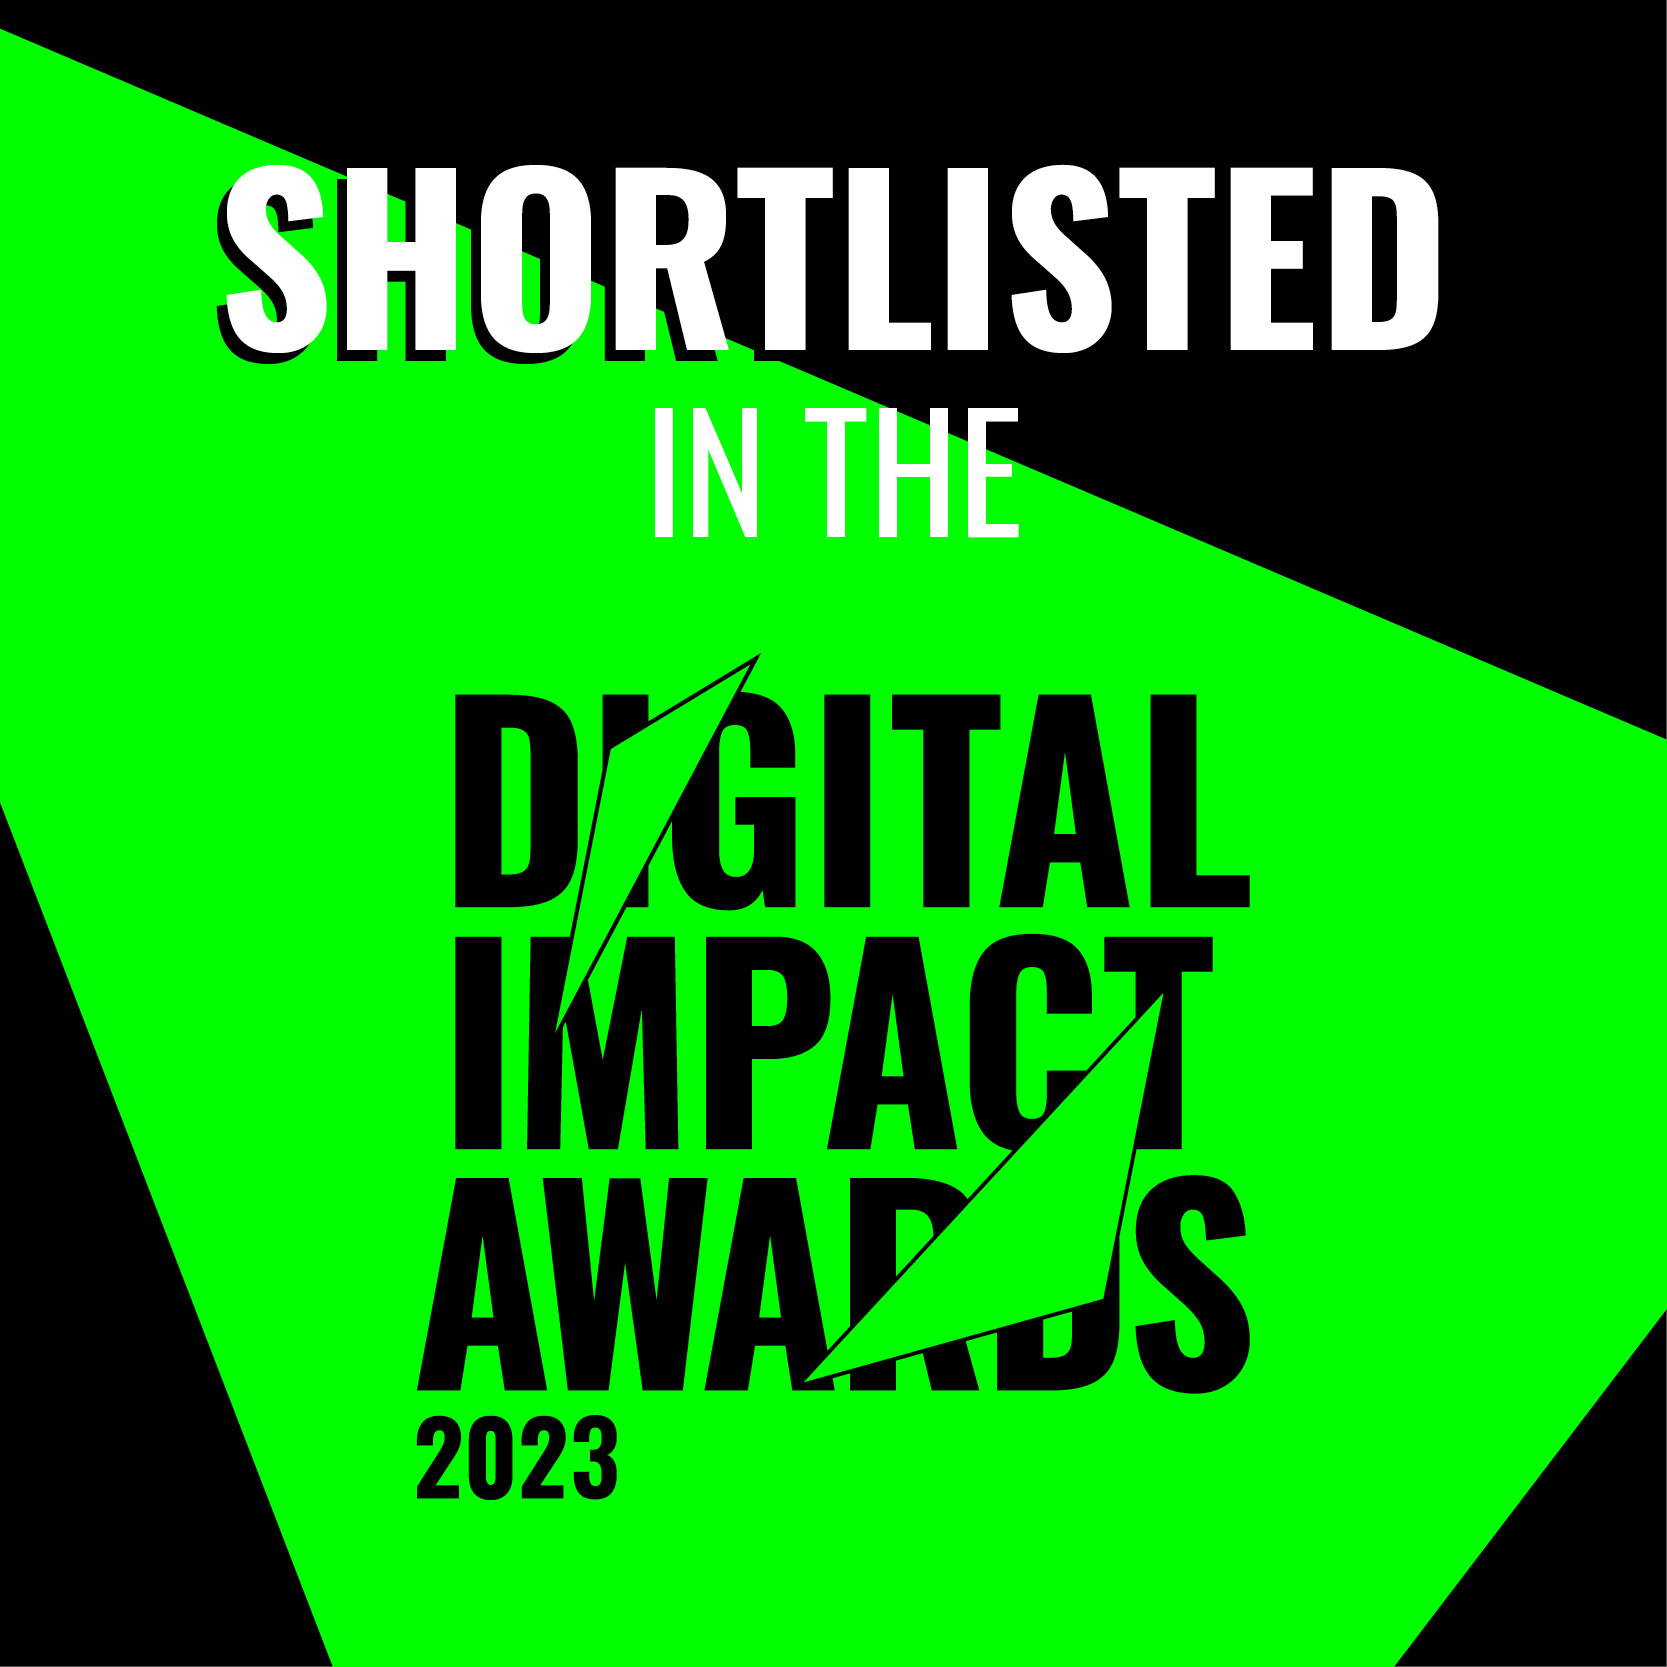 Shortlisted in the Digital Impact Awards 2023